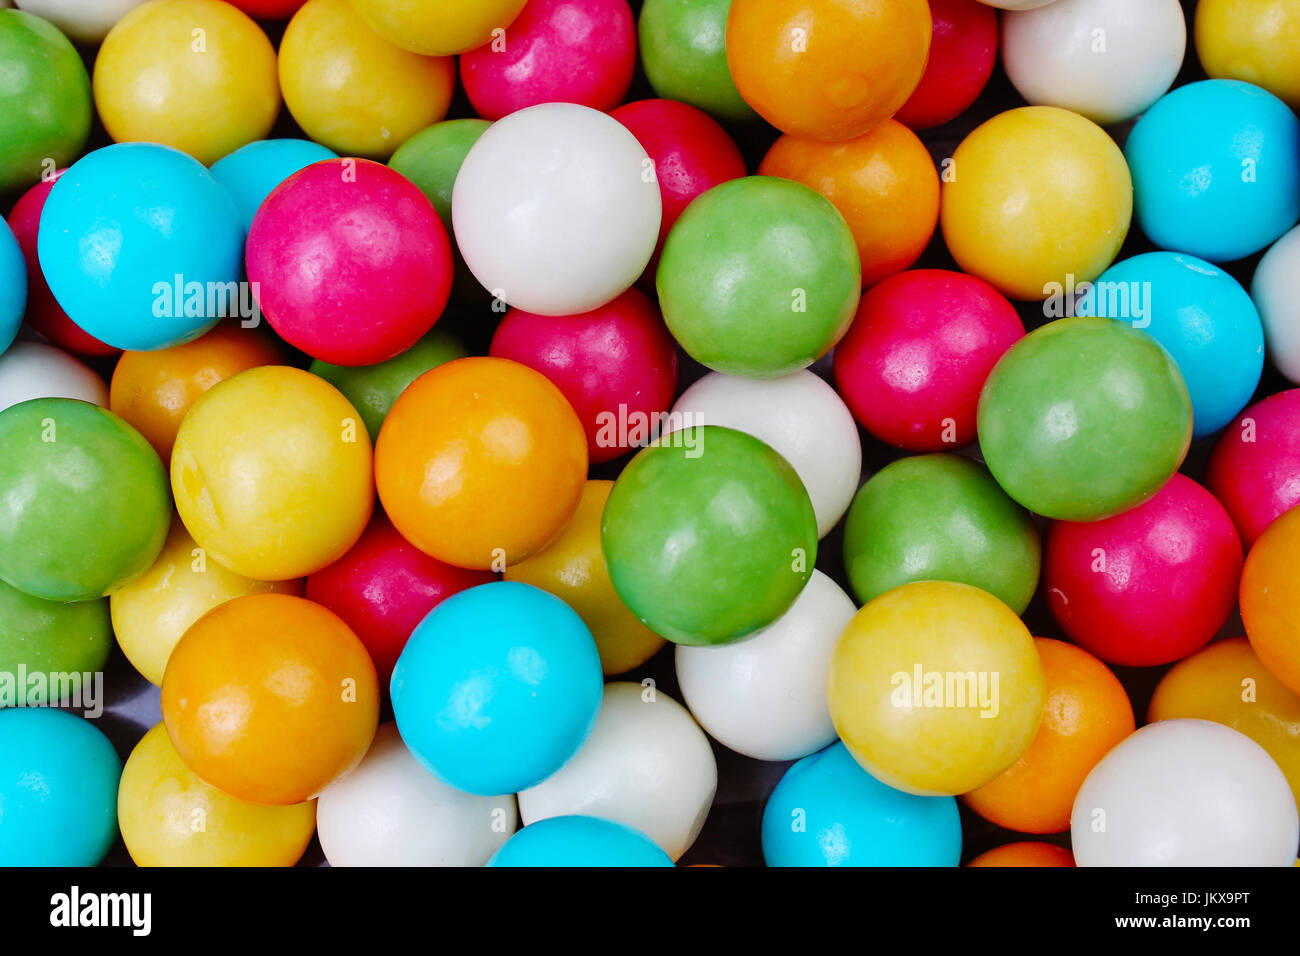 Bubble gum chewing gum texture. Rainbow multicolored gumballs chewing gums as background. Round sugar coated candy dragee bubblegum texture. Food cute Stock Photo